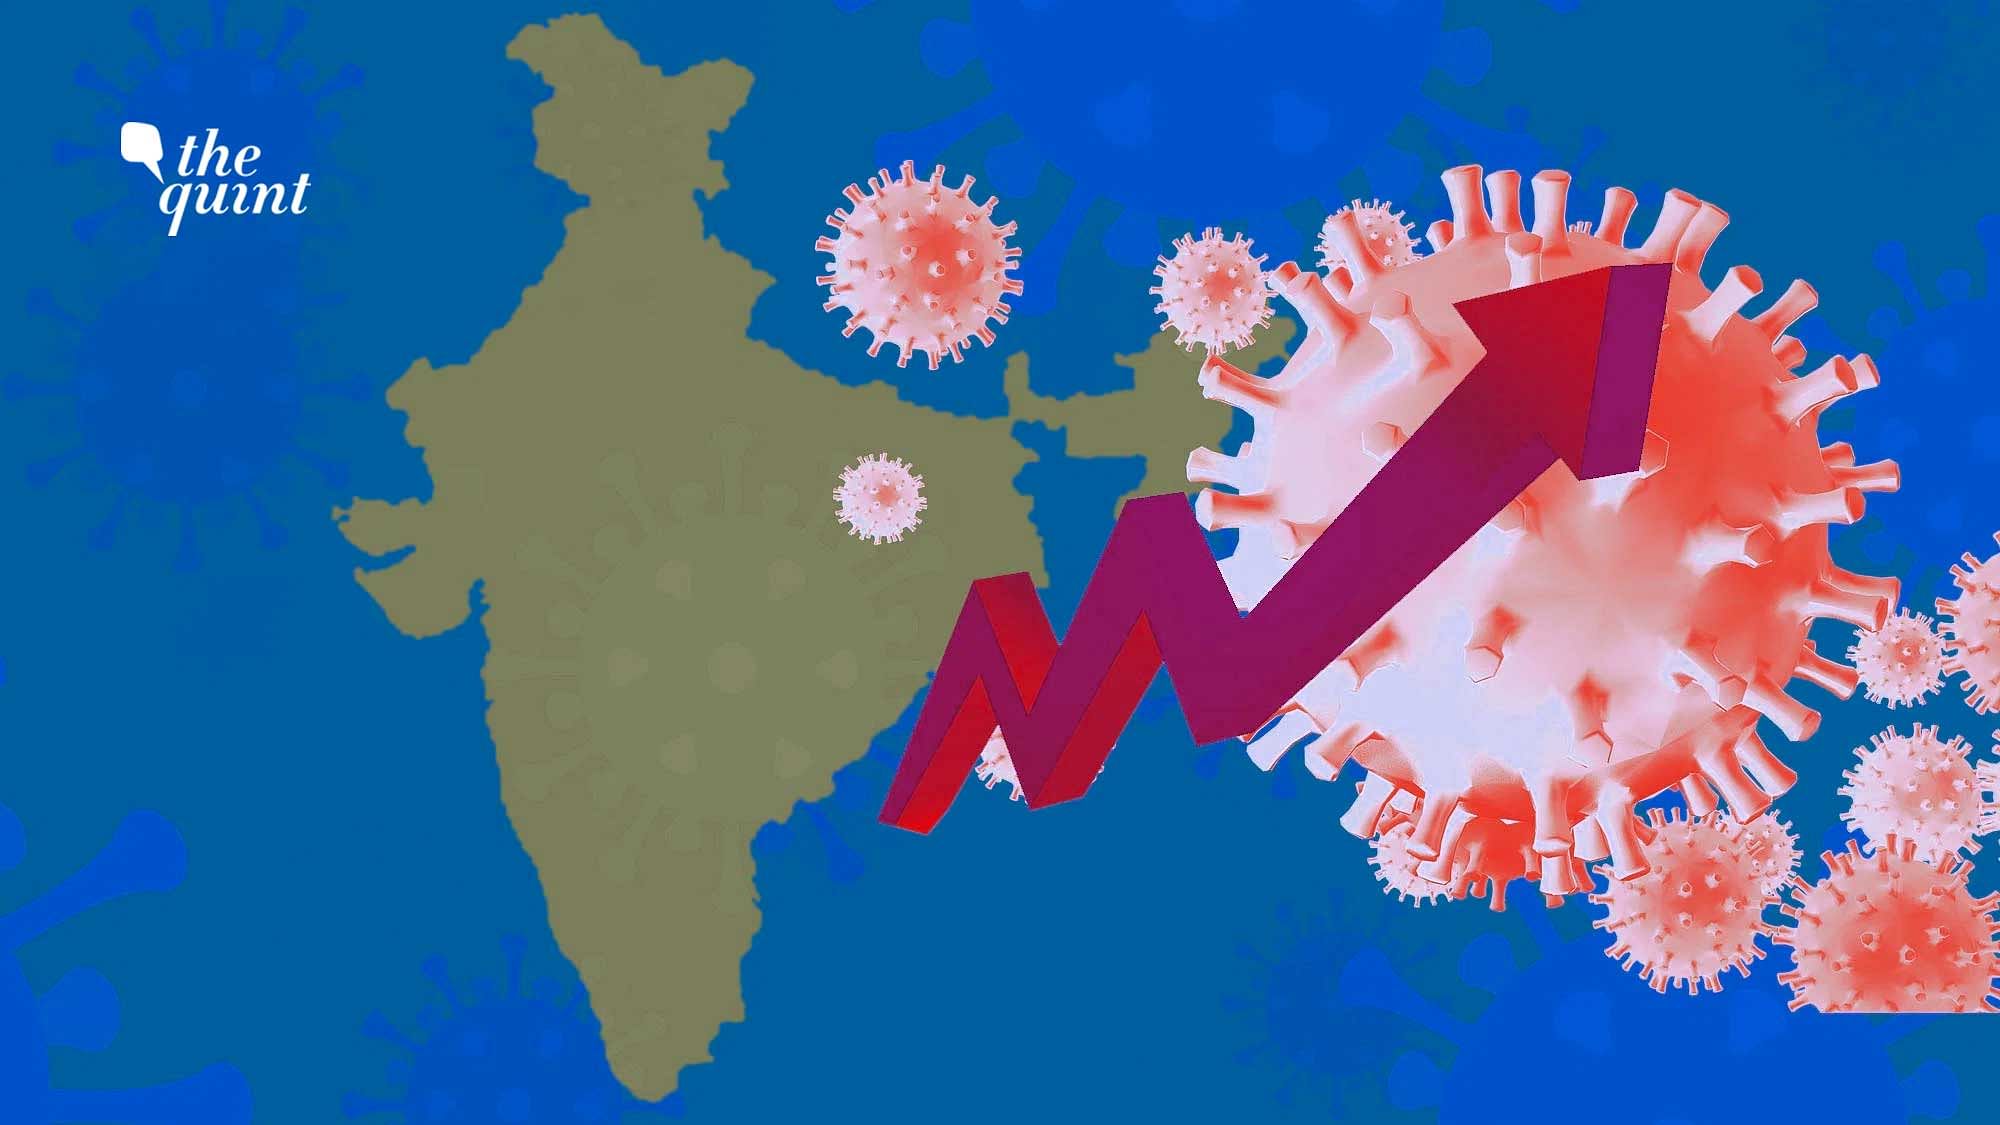 Image of India’s map and the coronavirus, used for representational purposes.